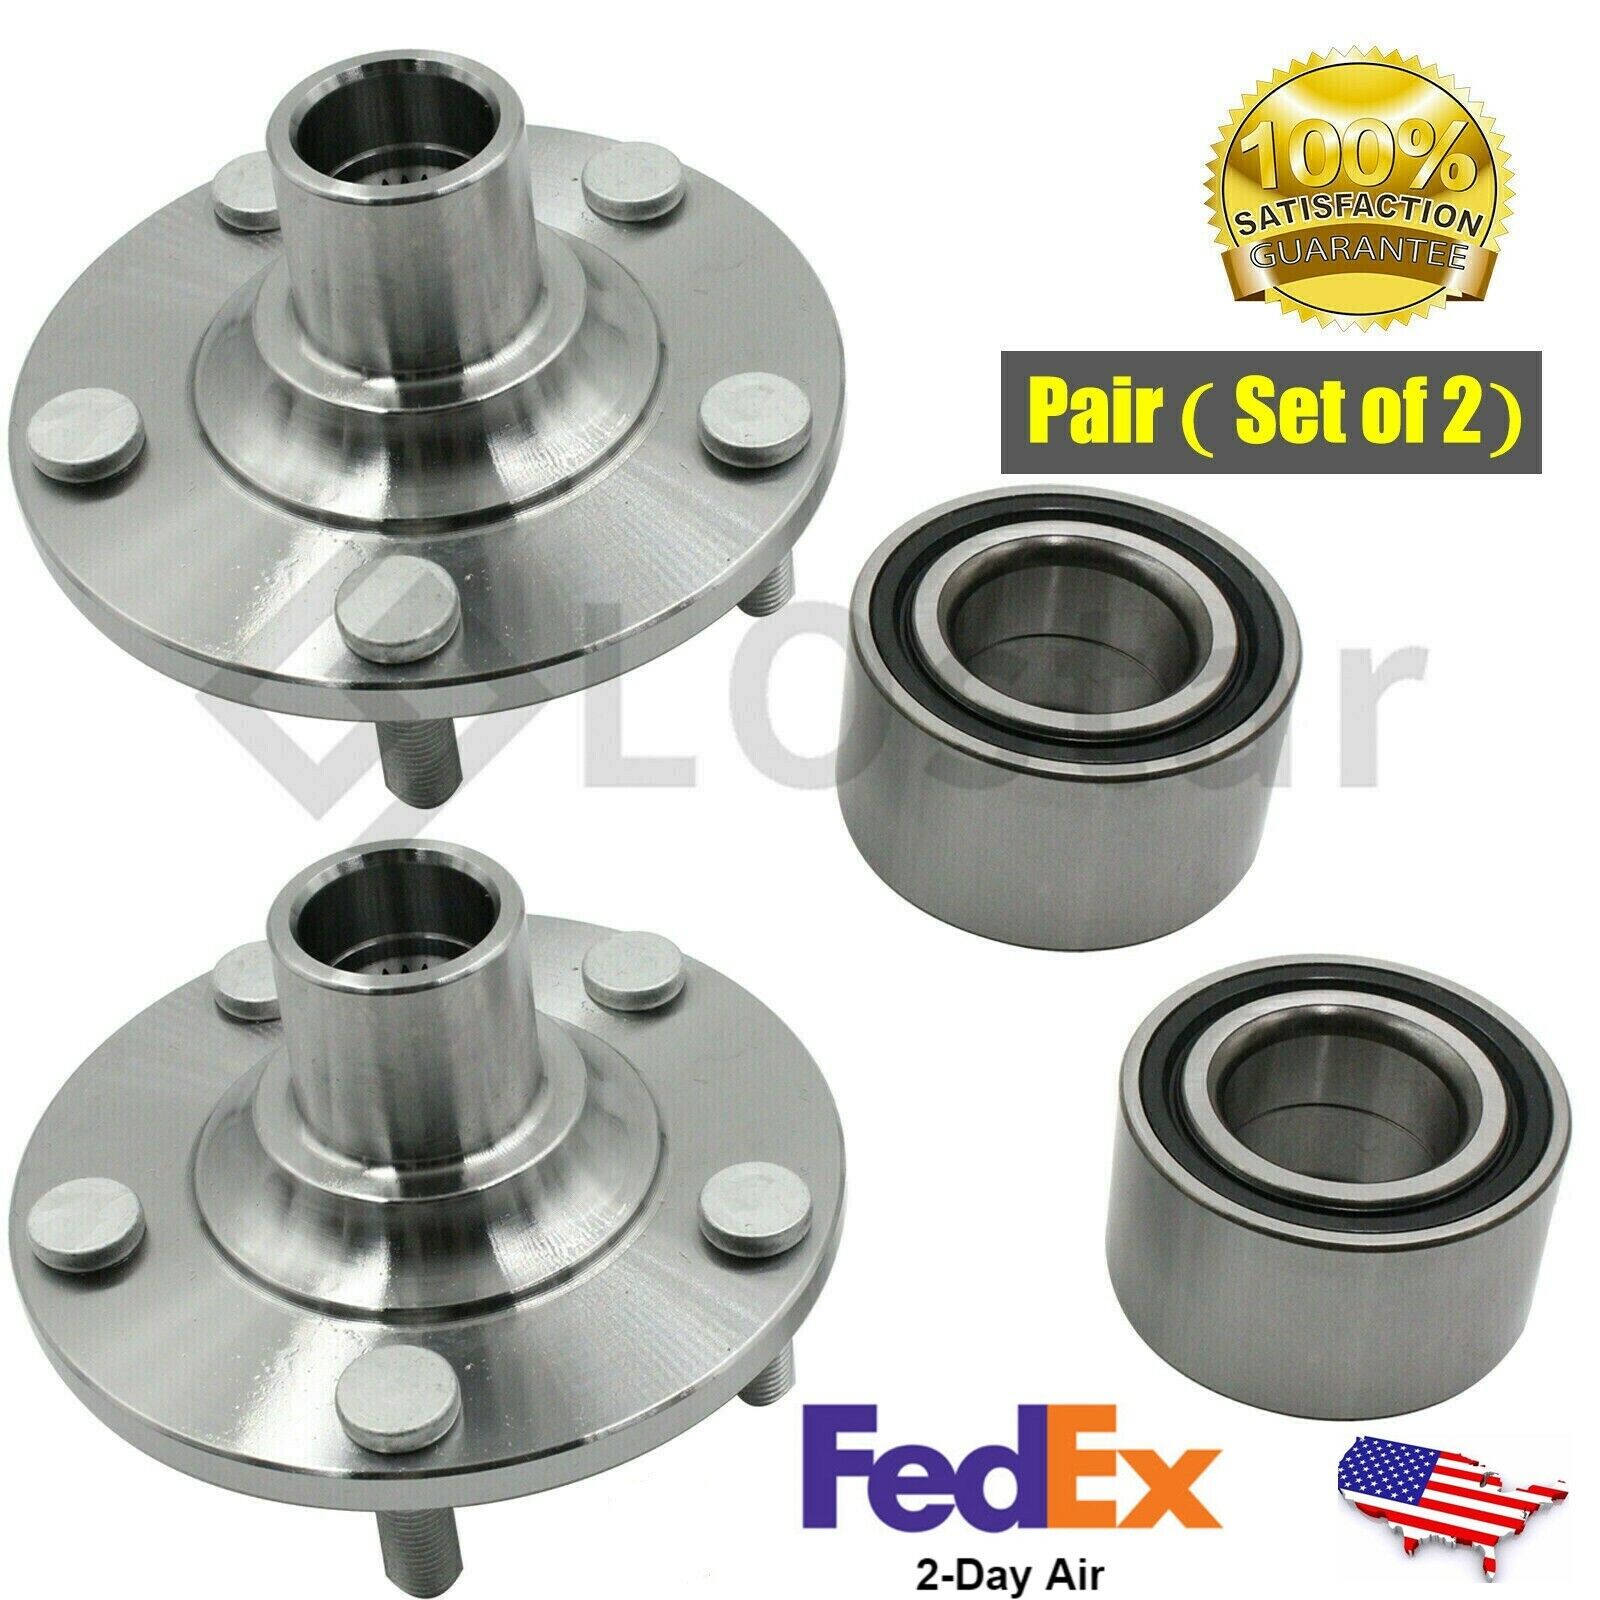 Pair (2) Front Wheel Hub & Bearing Assembly Fits MAZDA PROTEGE 01-03 / PROTEGE5 